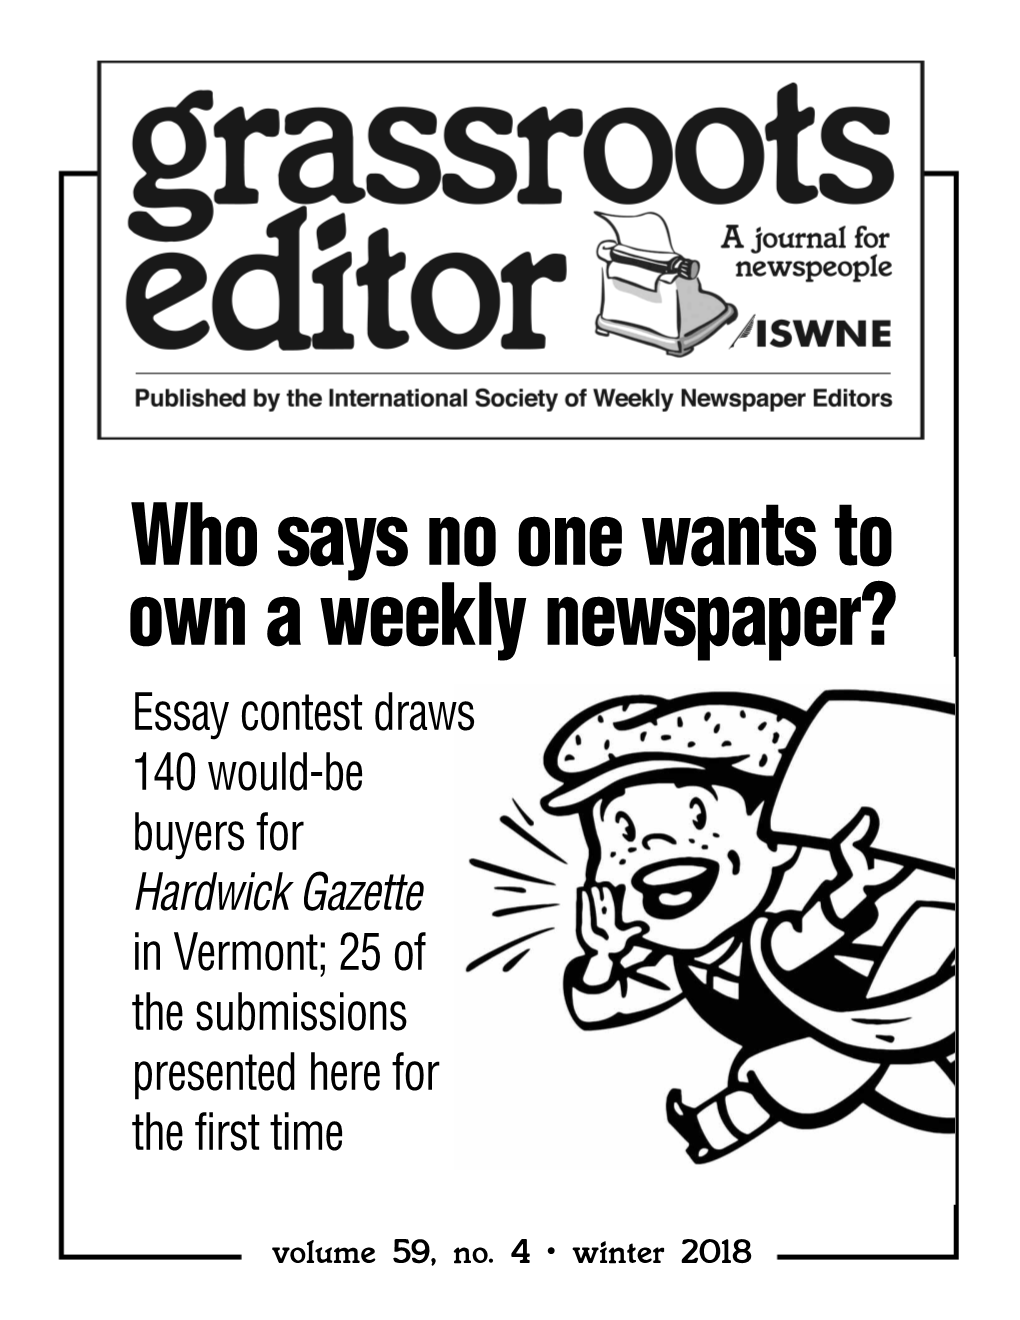 Who Says No One Wants to Own a Weekly Newspaper?